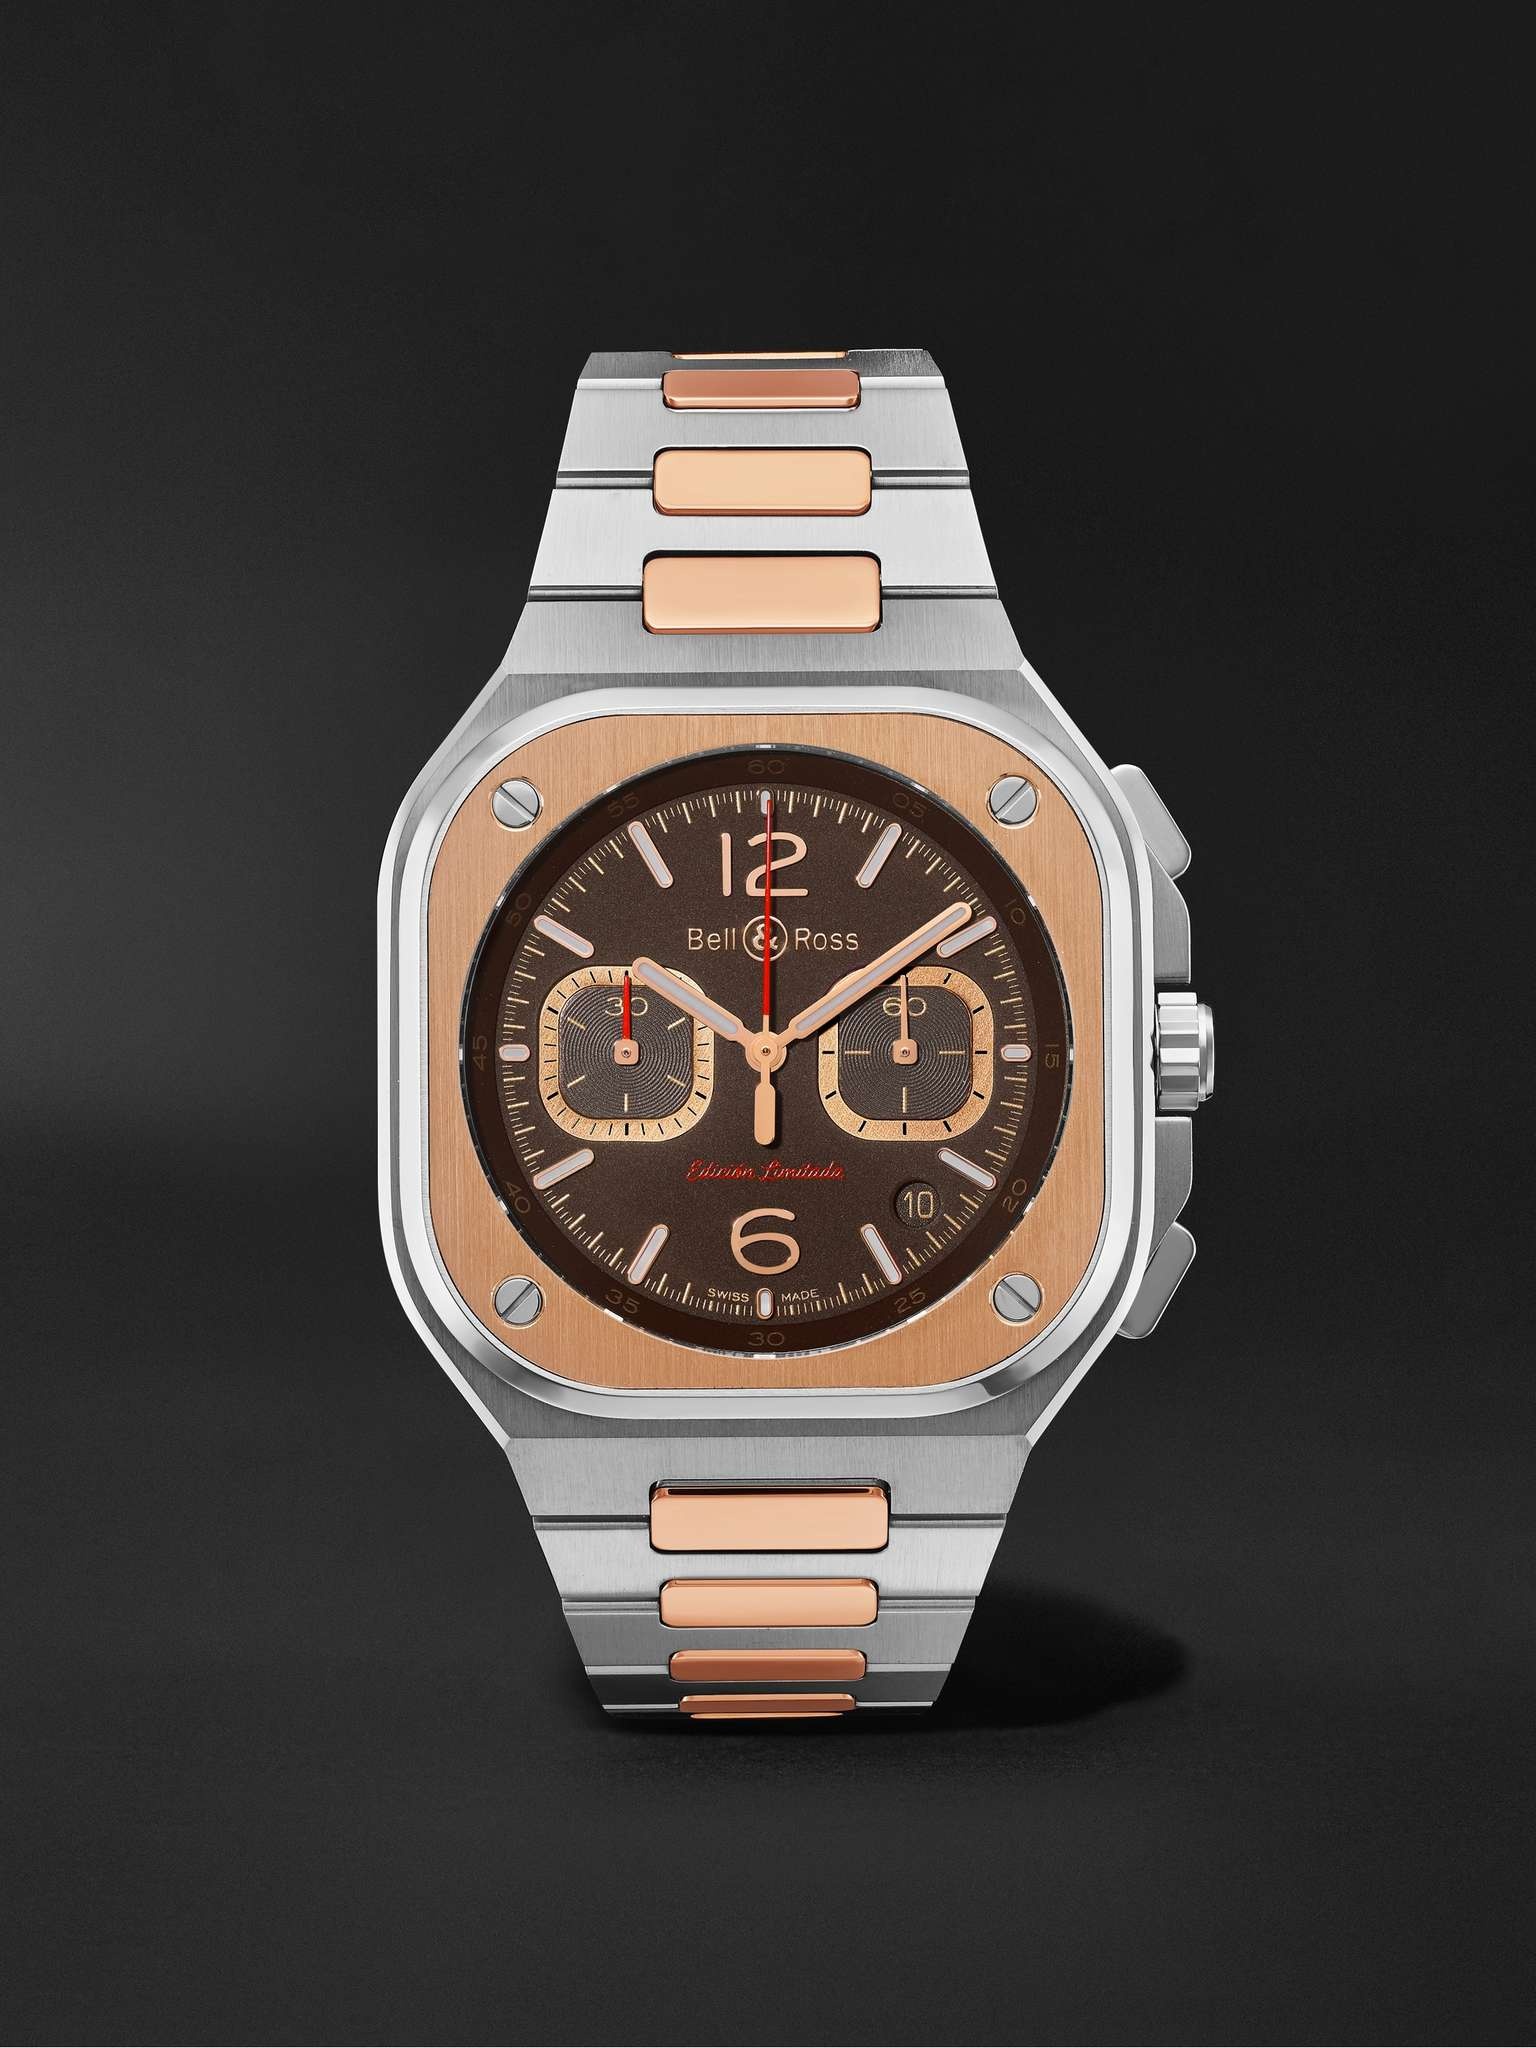 BR 05 Limited Edition Automatic Chronograph 42mm Stainless Steel and Rose Gold Watch, Ref. No. BR05C - 1